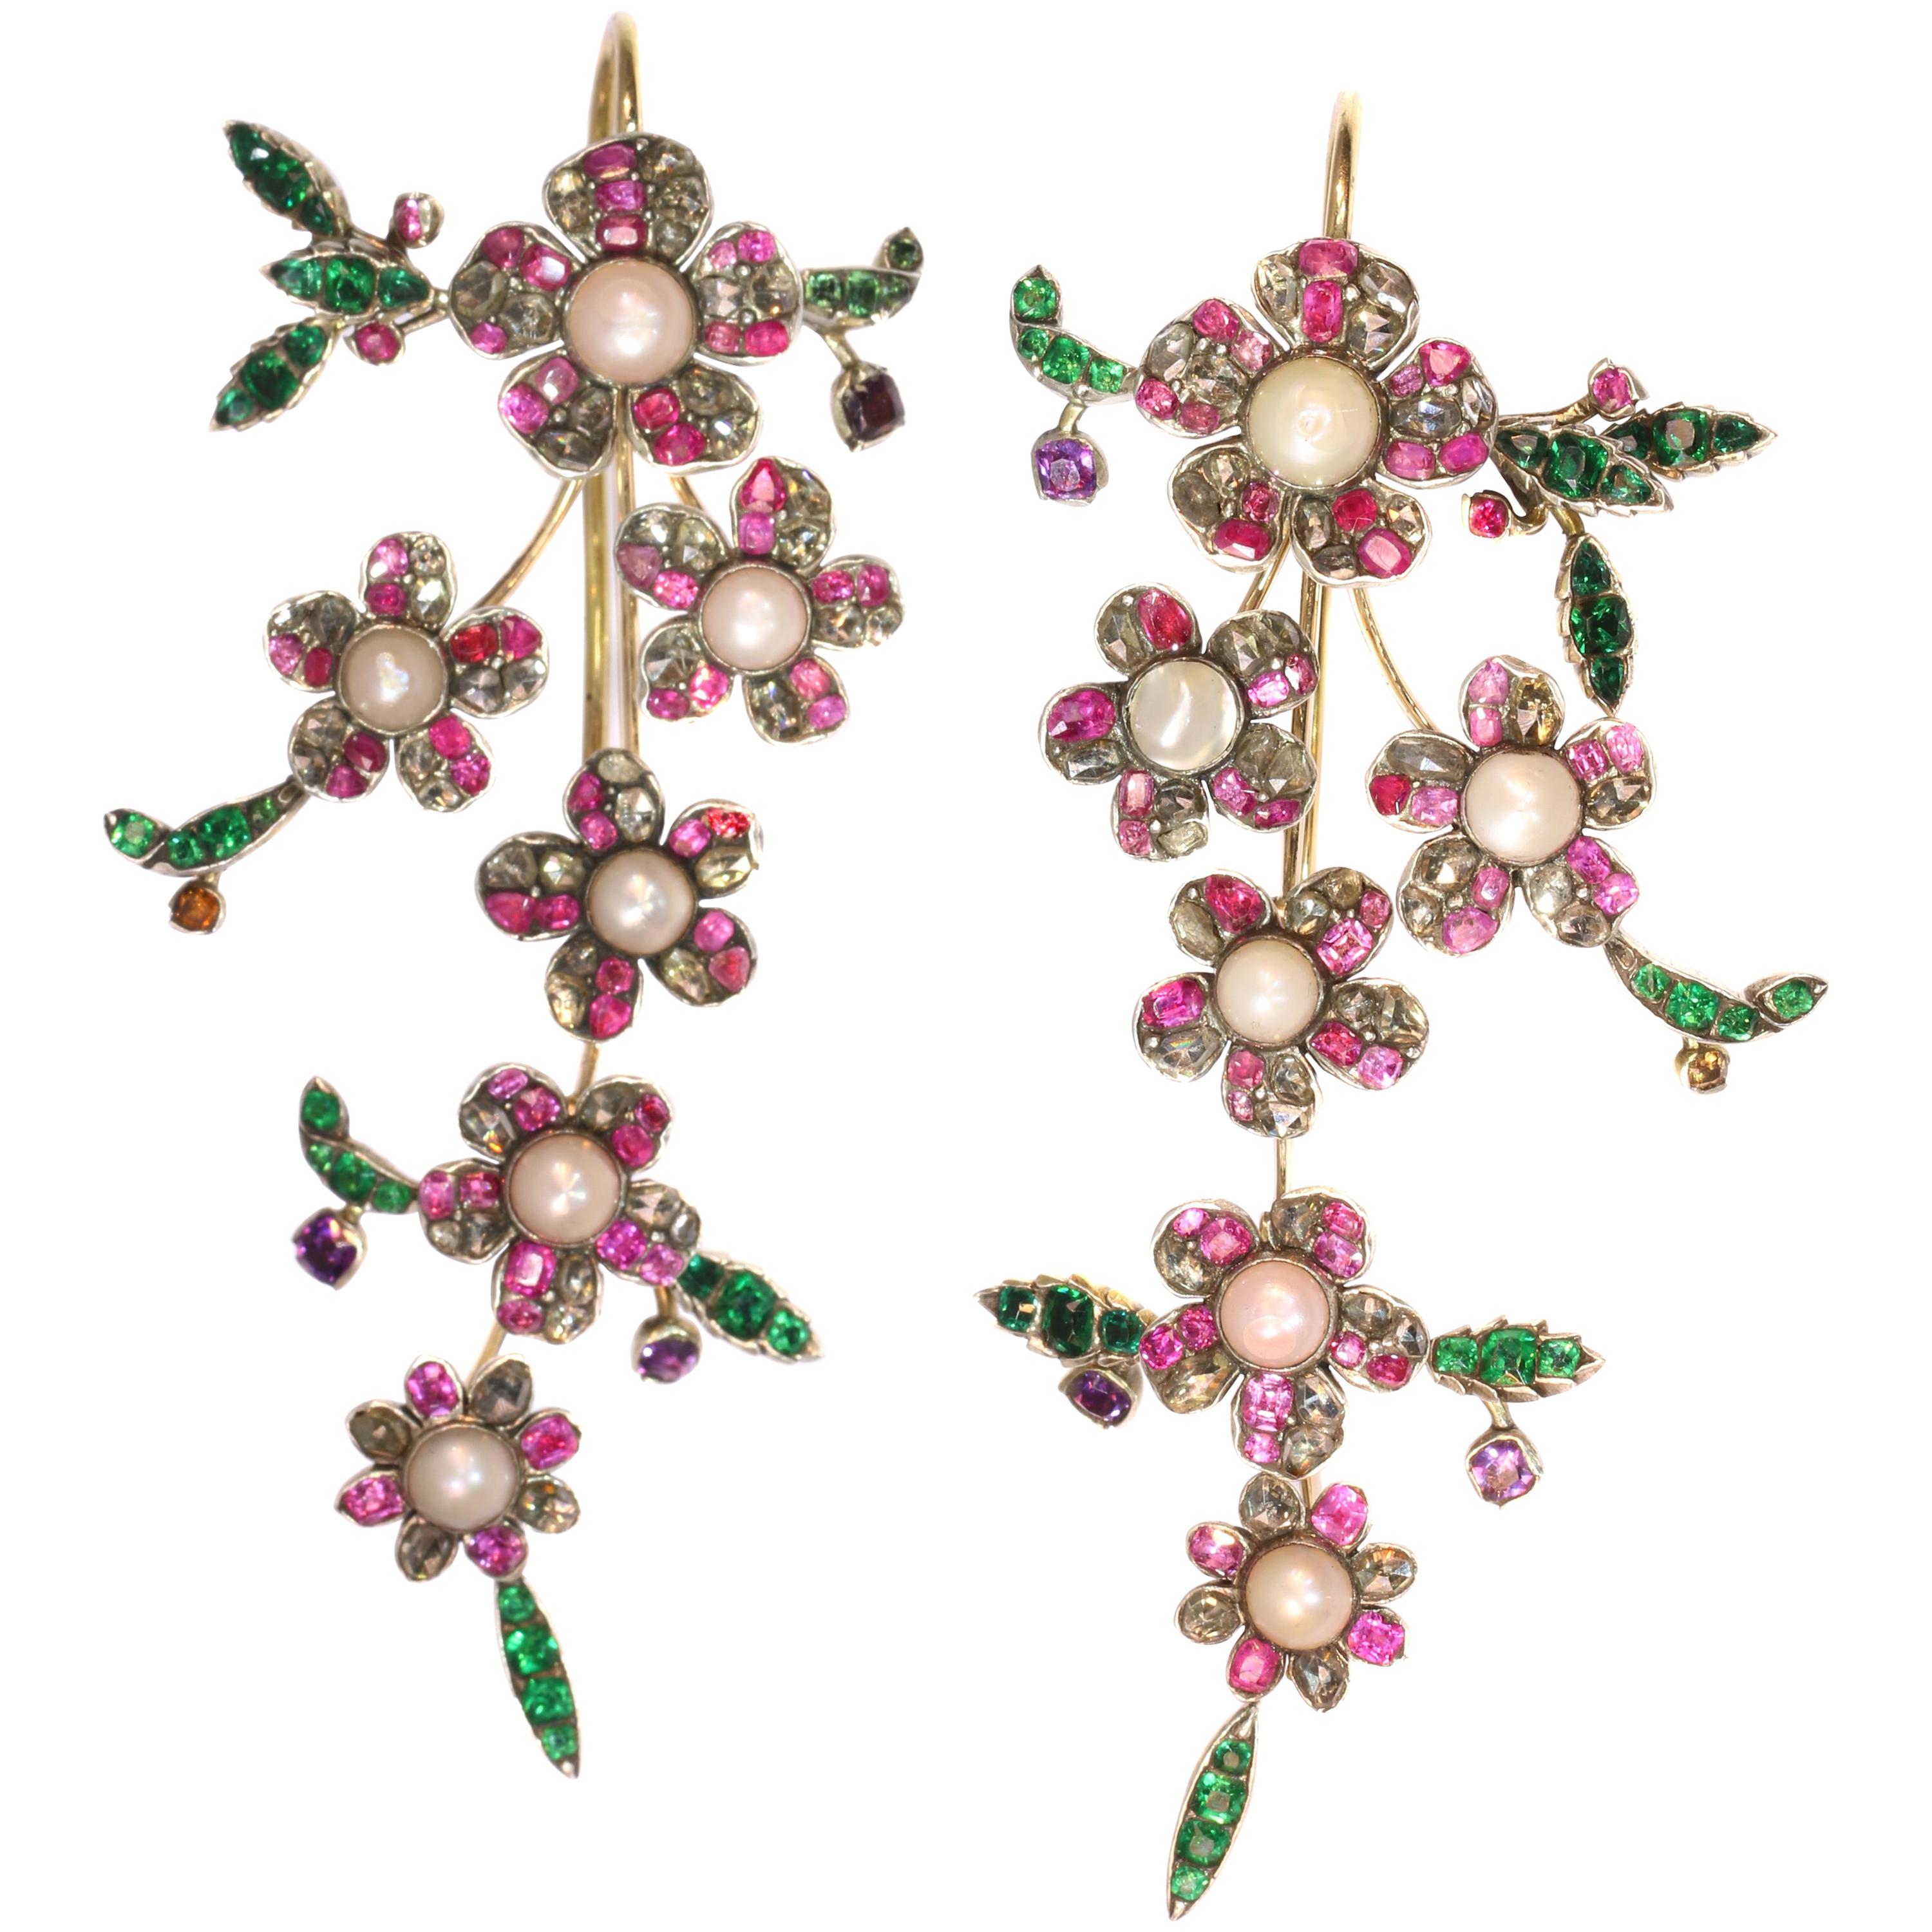 Extravagant Long Pendent Earrings from Antique Parts Diamonds, Pearls, Rubies im Angebot